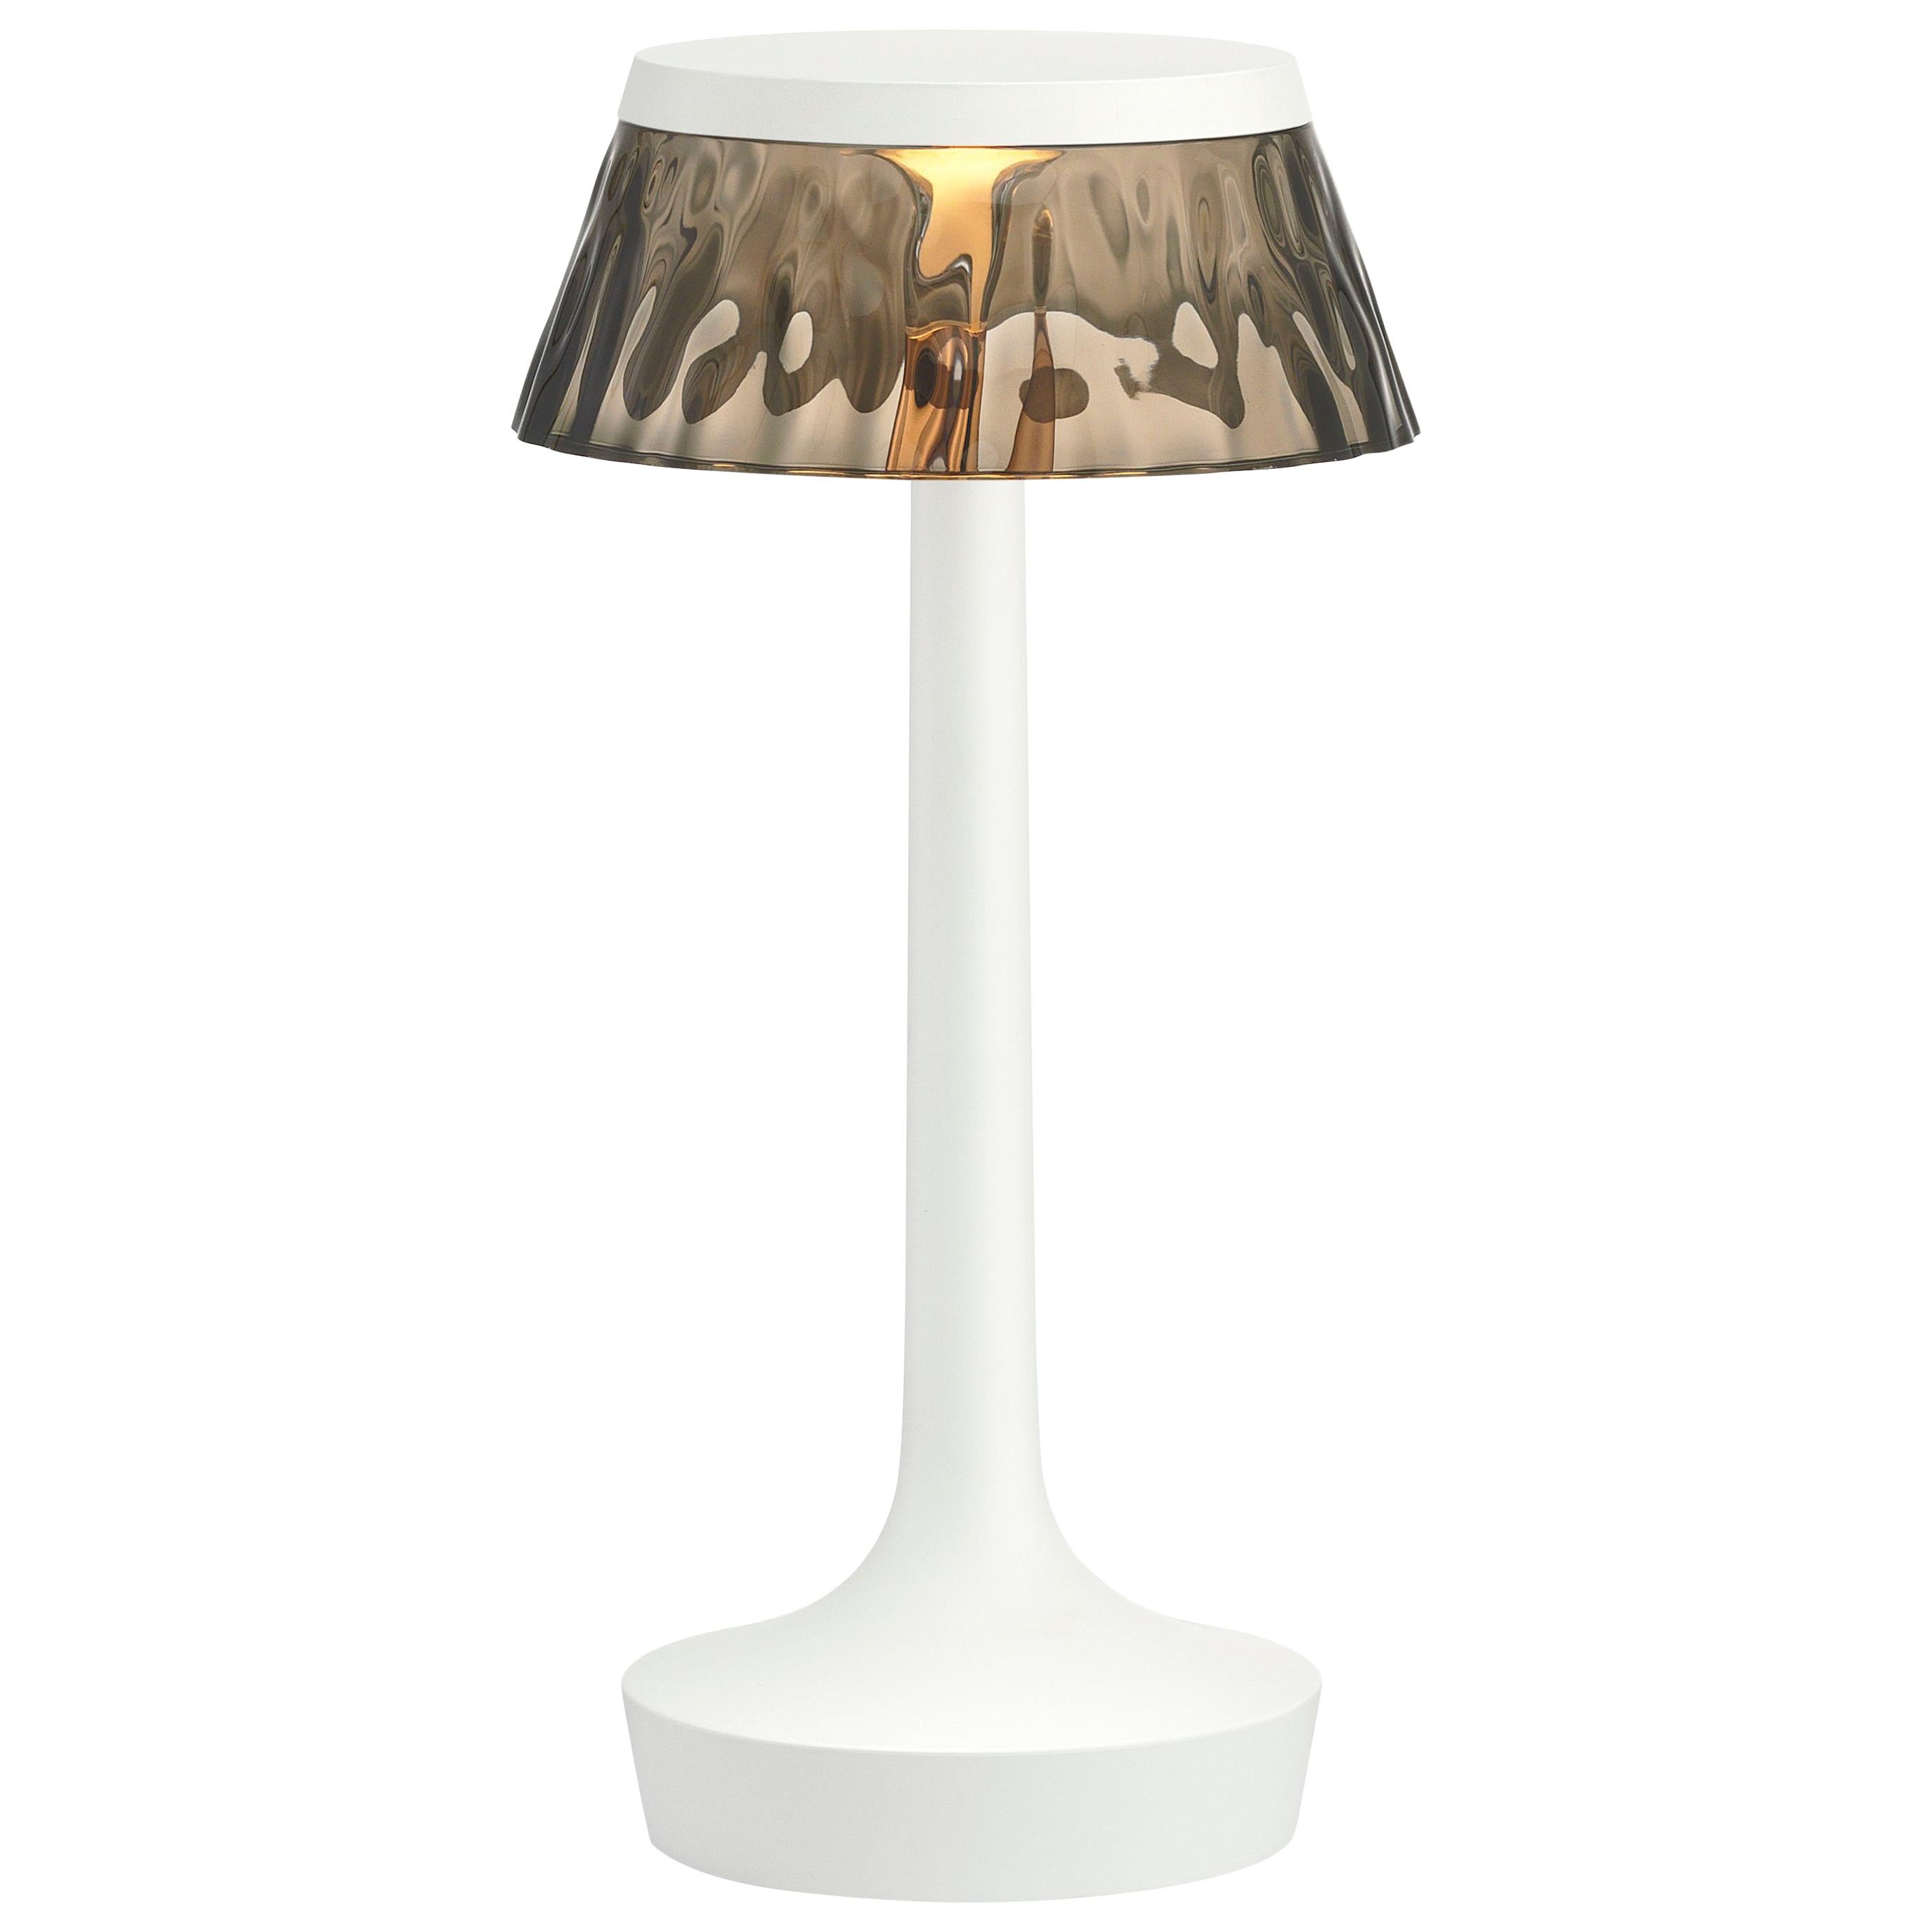 FLOS Bon Jour Unplugged White Lamp w/ Fumee Crown by Philippe Starck